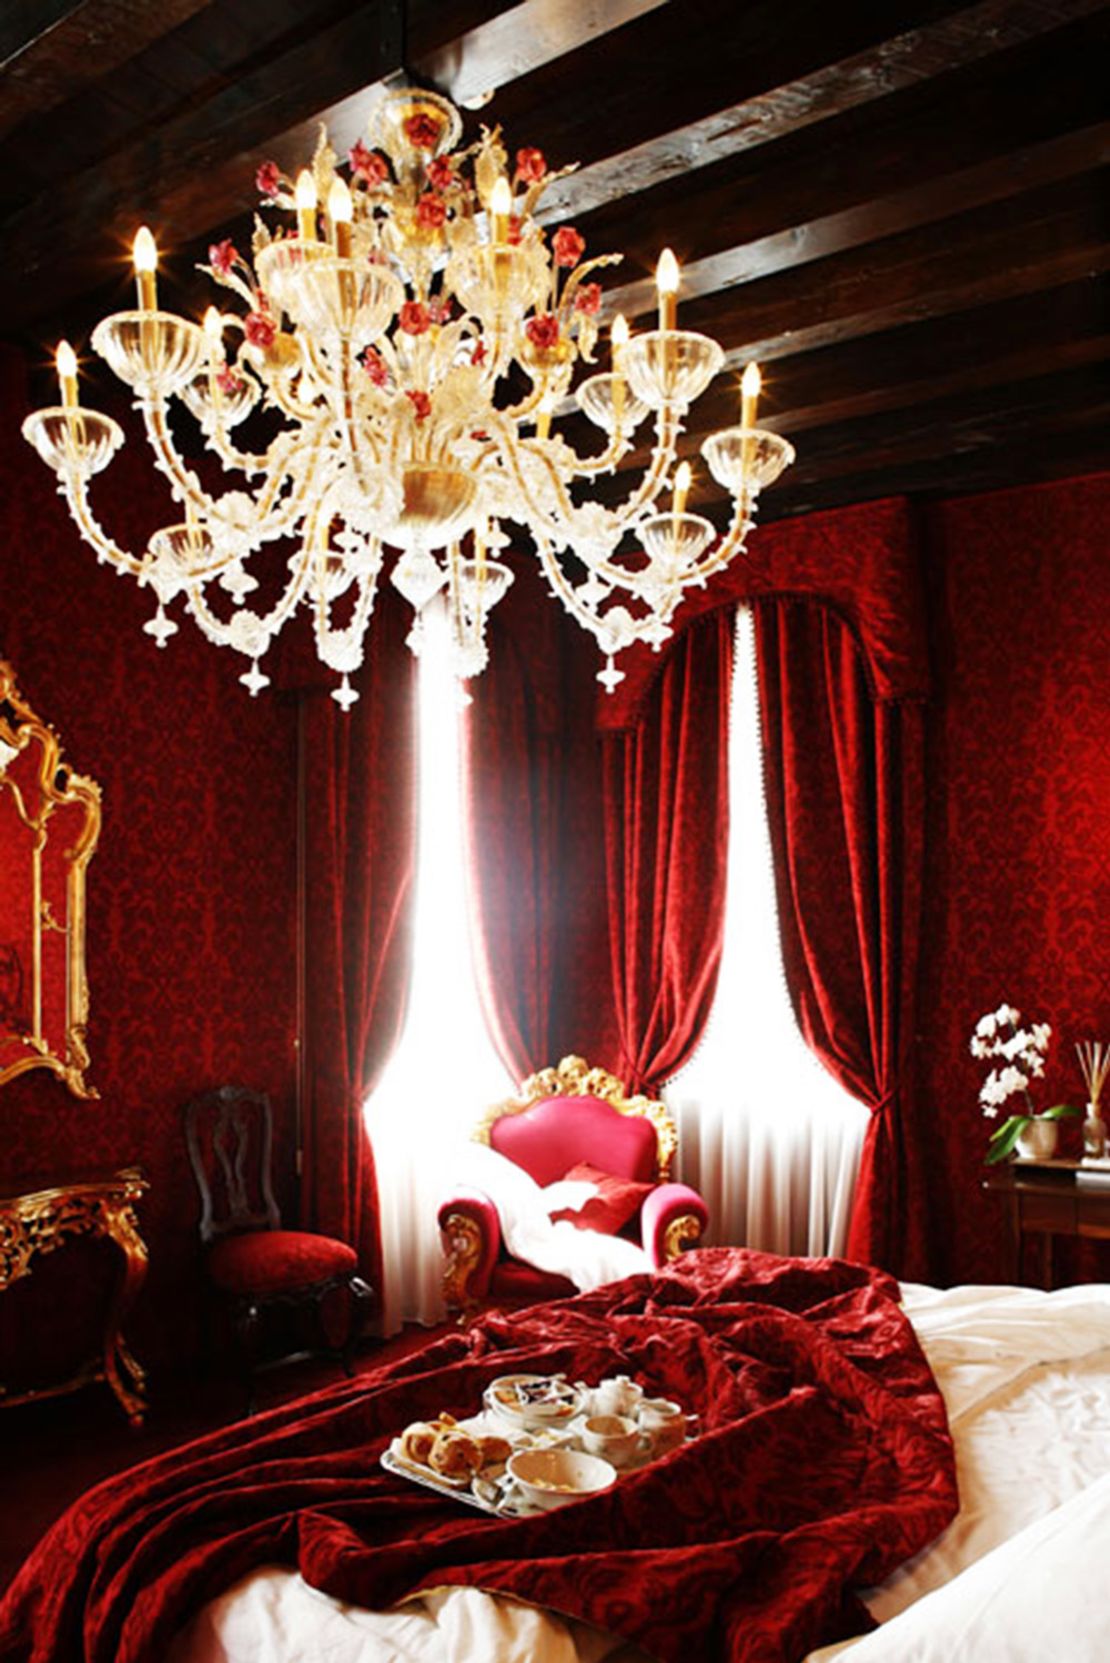 The Ca Maria Adele hotel in Venice placed second in the Sexiest Bedroom in the World category. 